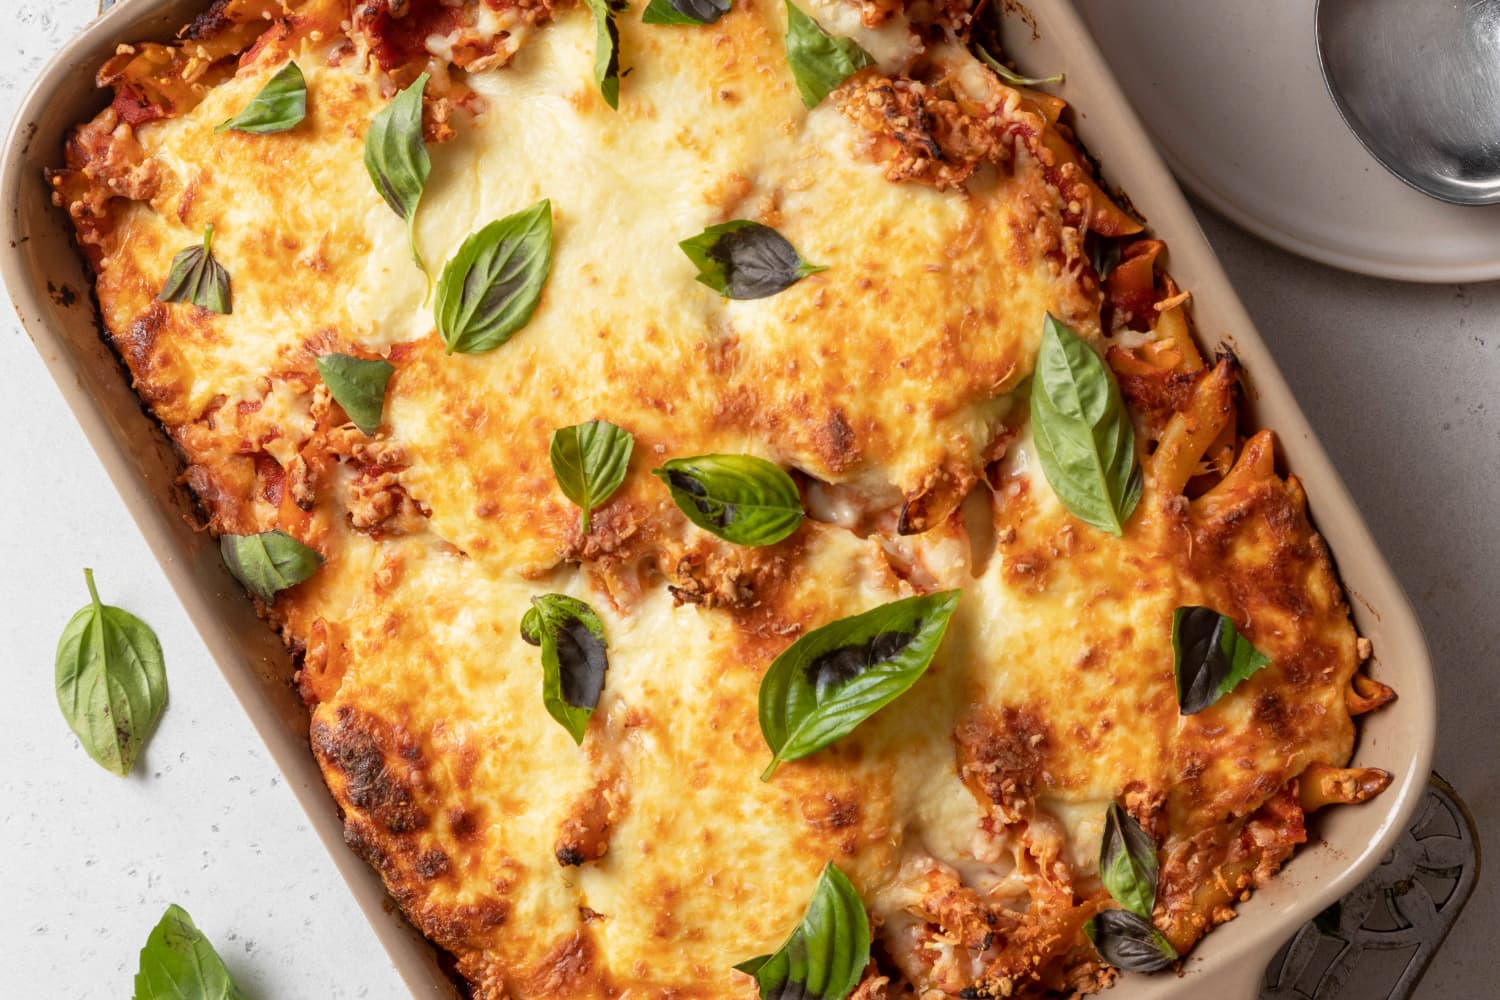 Mostaccioli Recipe (Cheesy Baked Pasta with Sausage) | The Kitchn